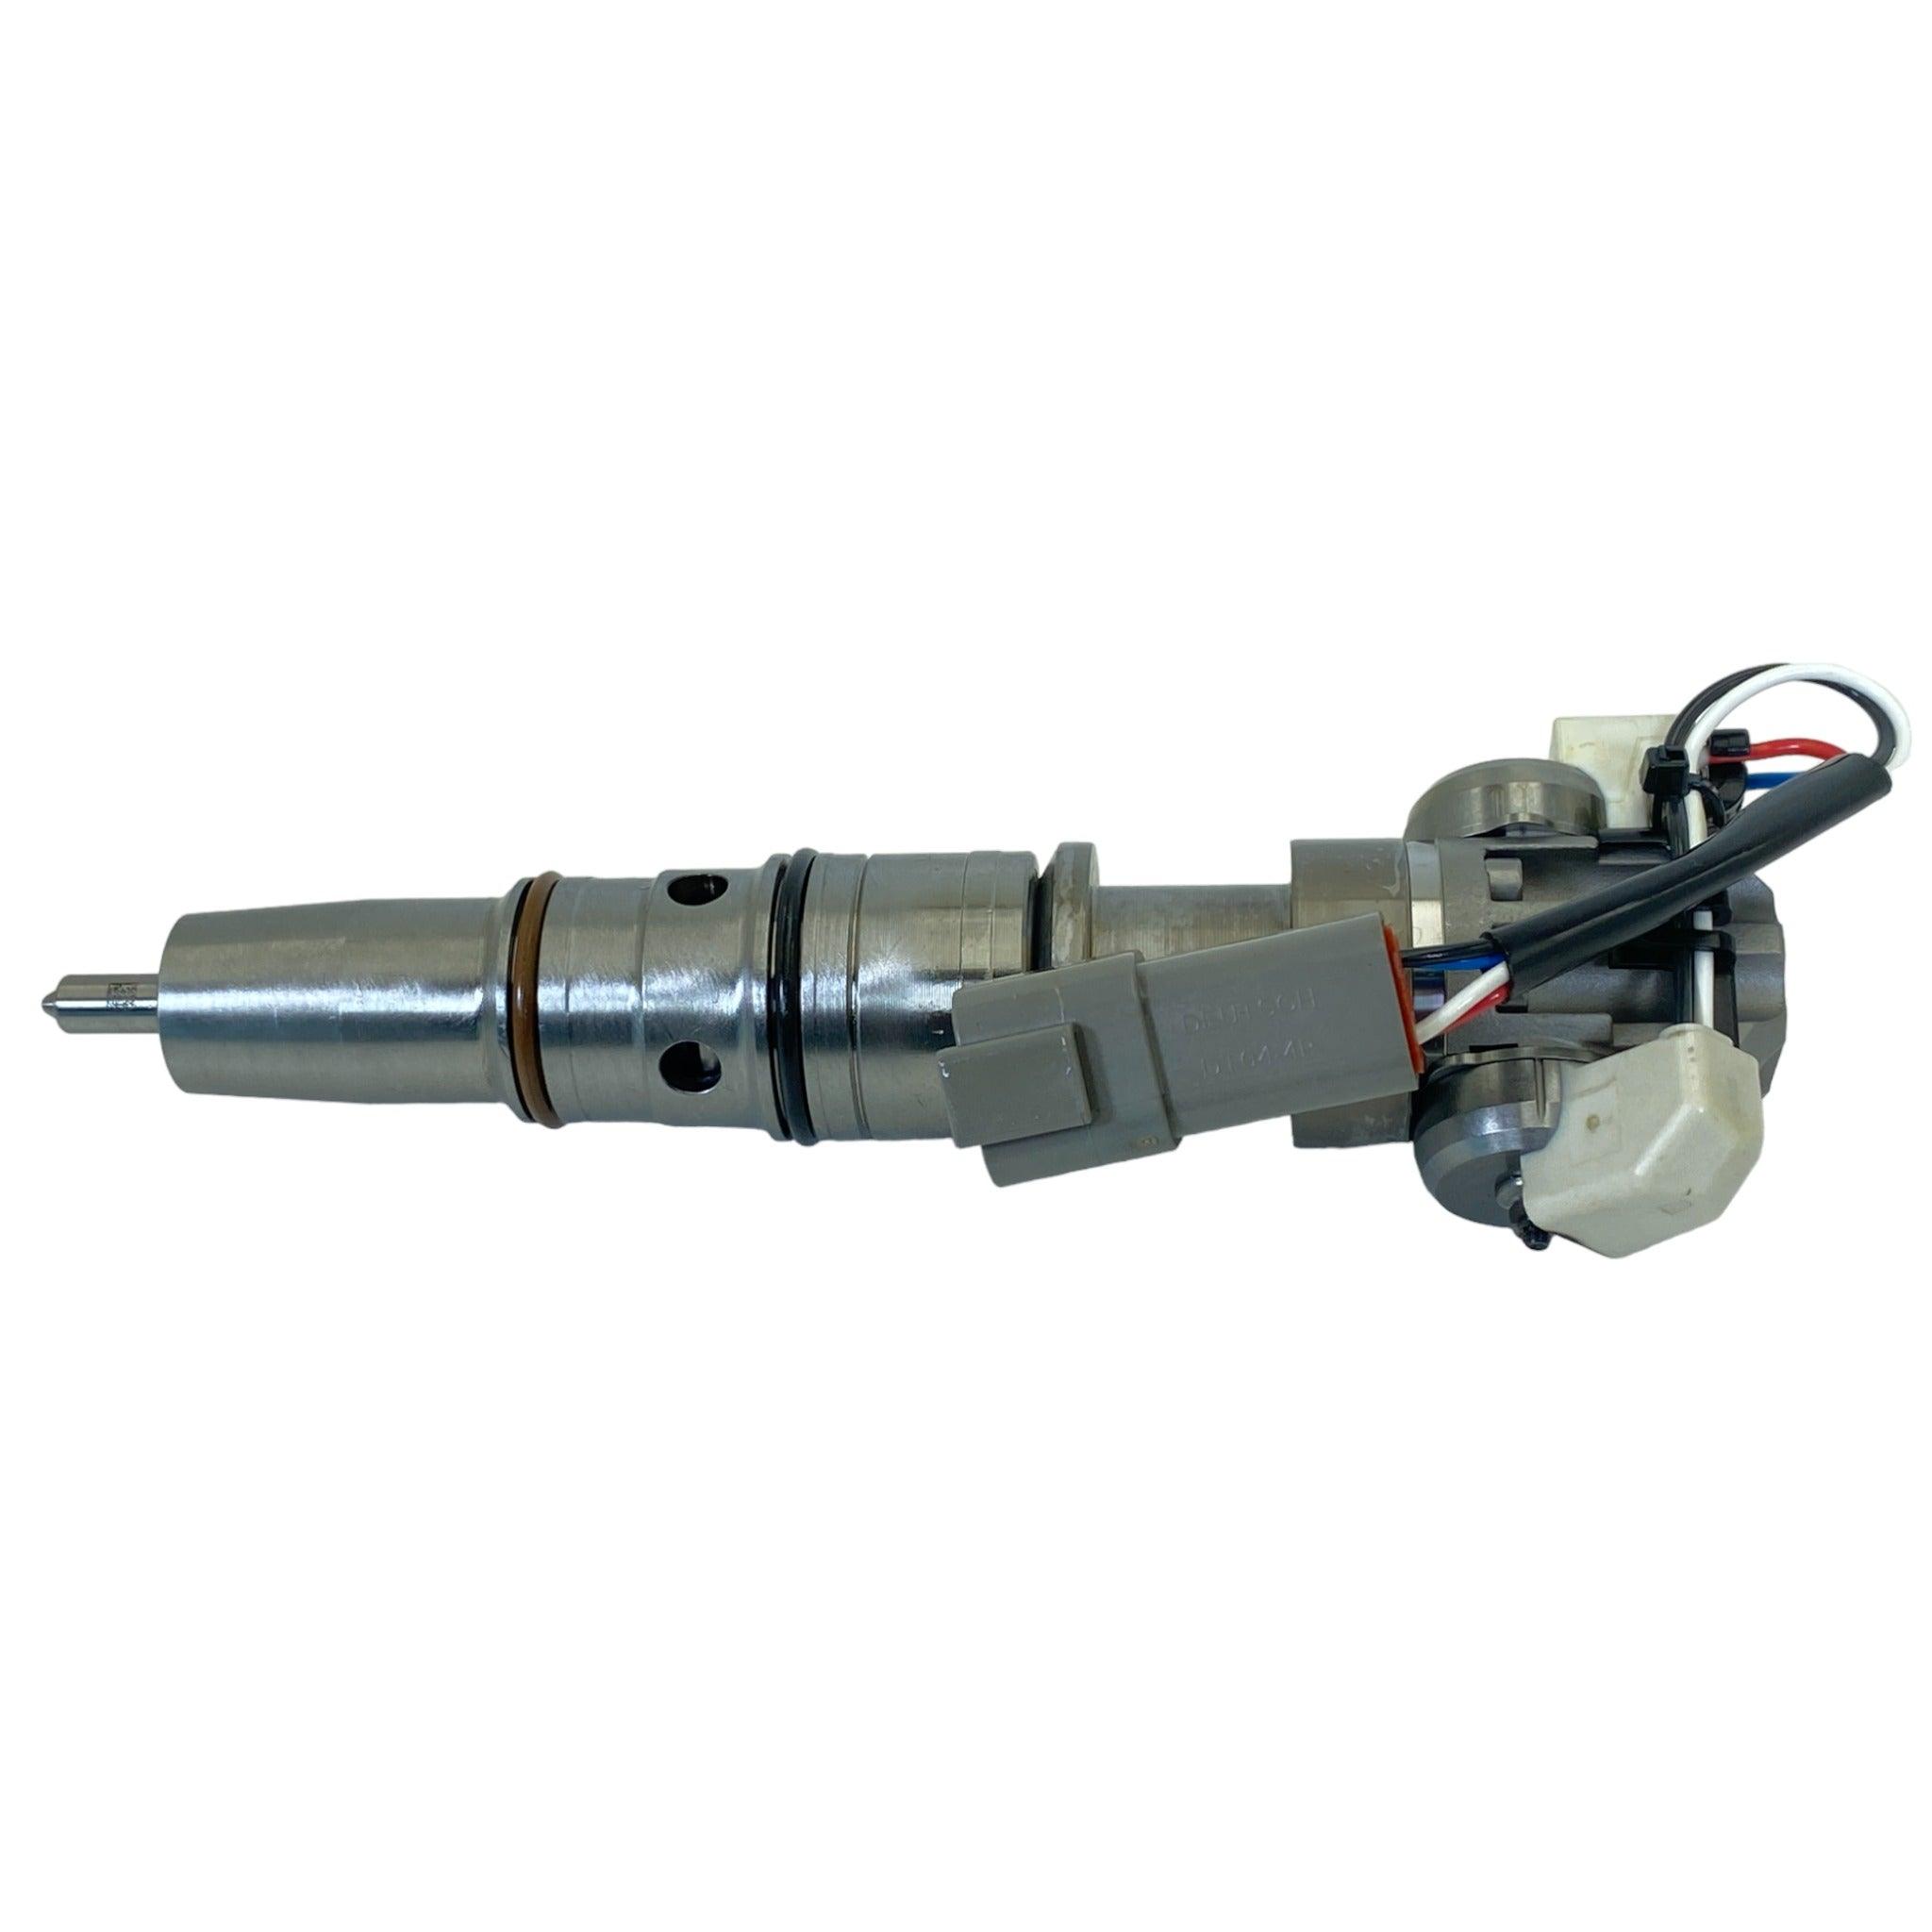 R-5010561R93 Interstate-Mcbee Fuel Injector - ADVANCED TRUCK PARTS